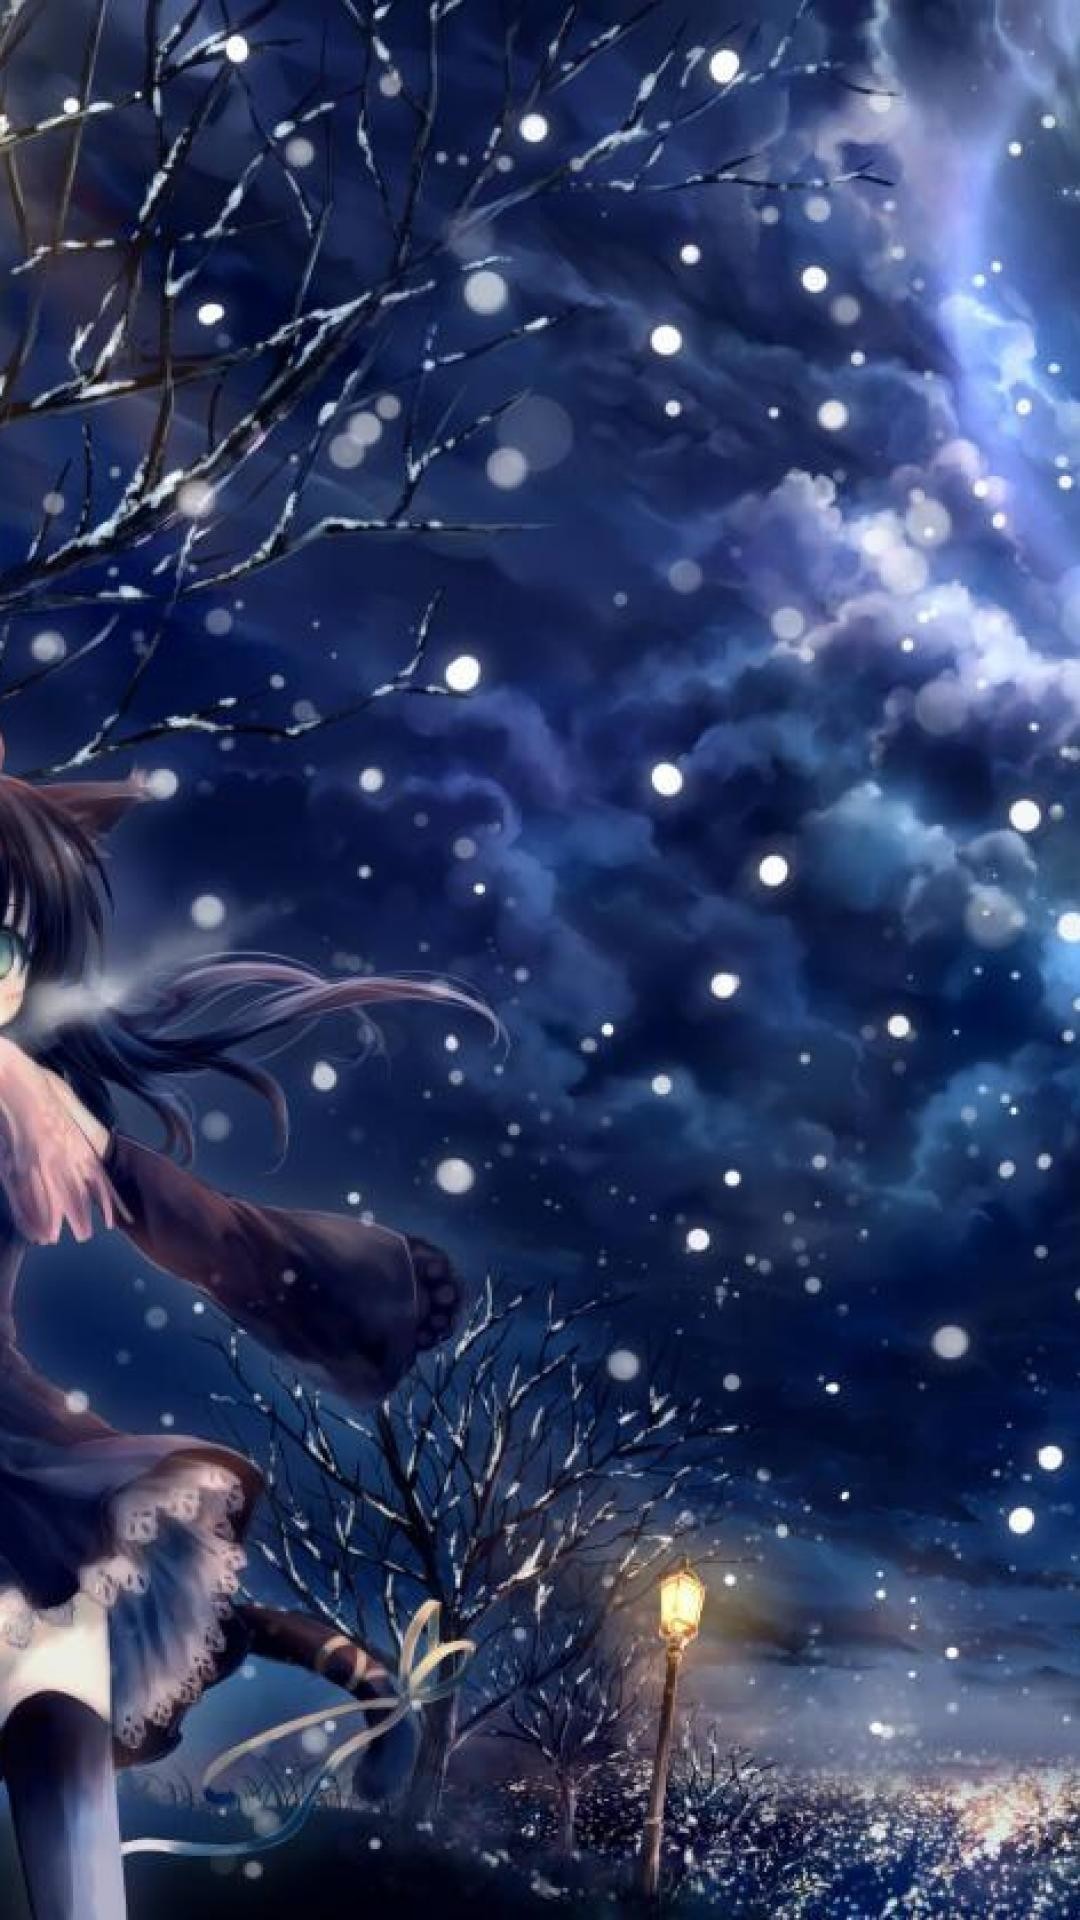 1080x1920 1920x1080 Beautiful Winter Anime Pictures | Digiatto.com | HD Wallpaper and  Download Free Wallpaper